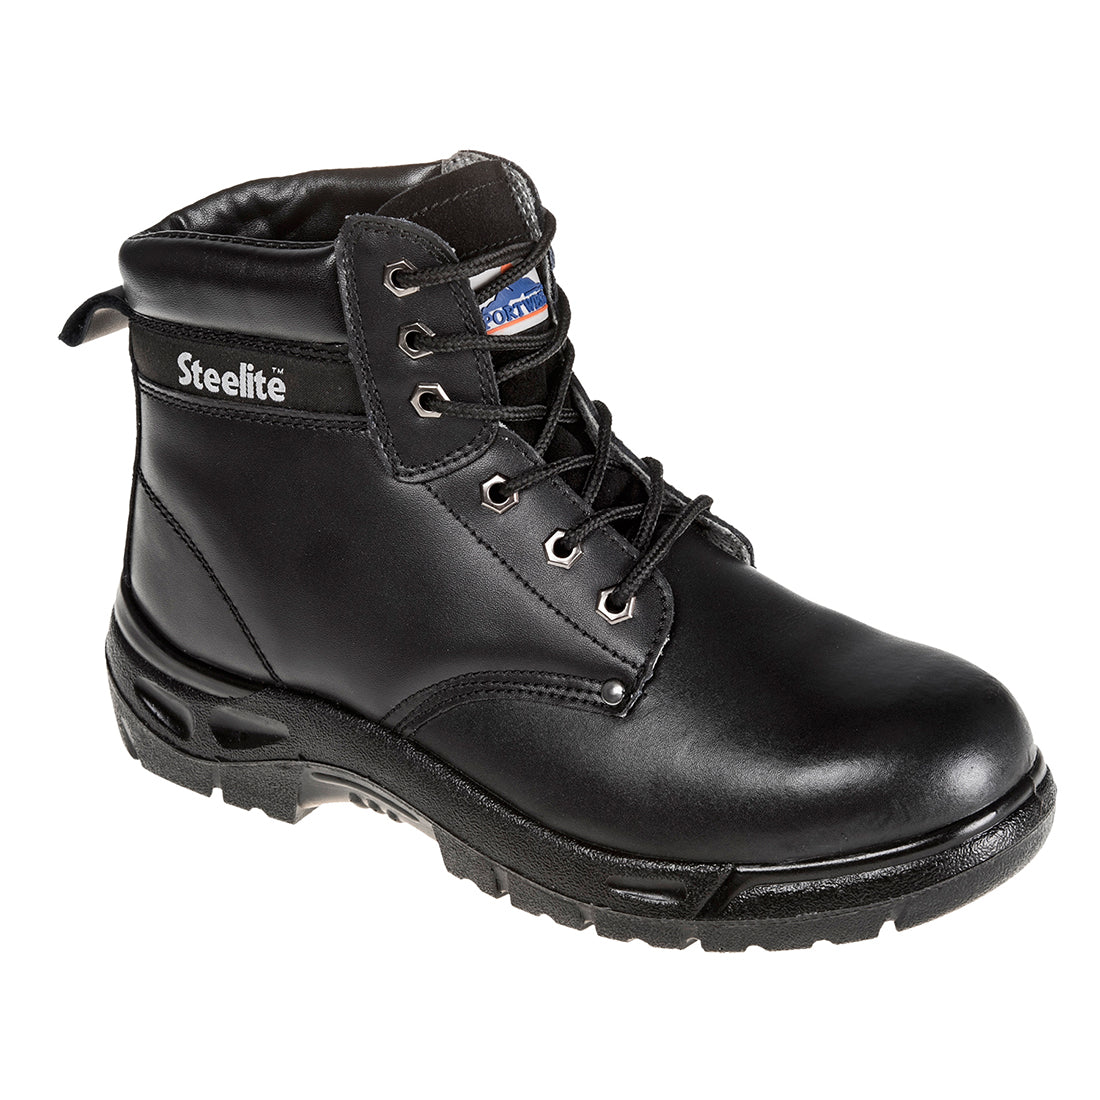 PORTWEST SIZE 8 / 42 FW03 Black Steelite Boot S3 Steel toe safety boot rigger